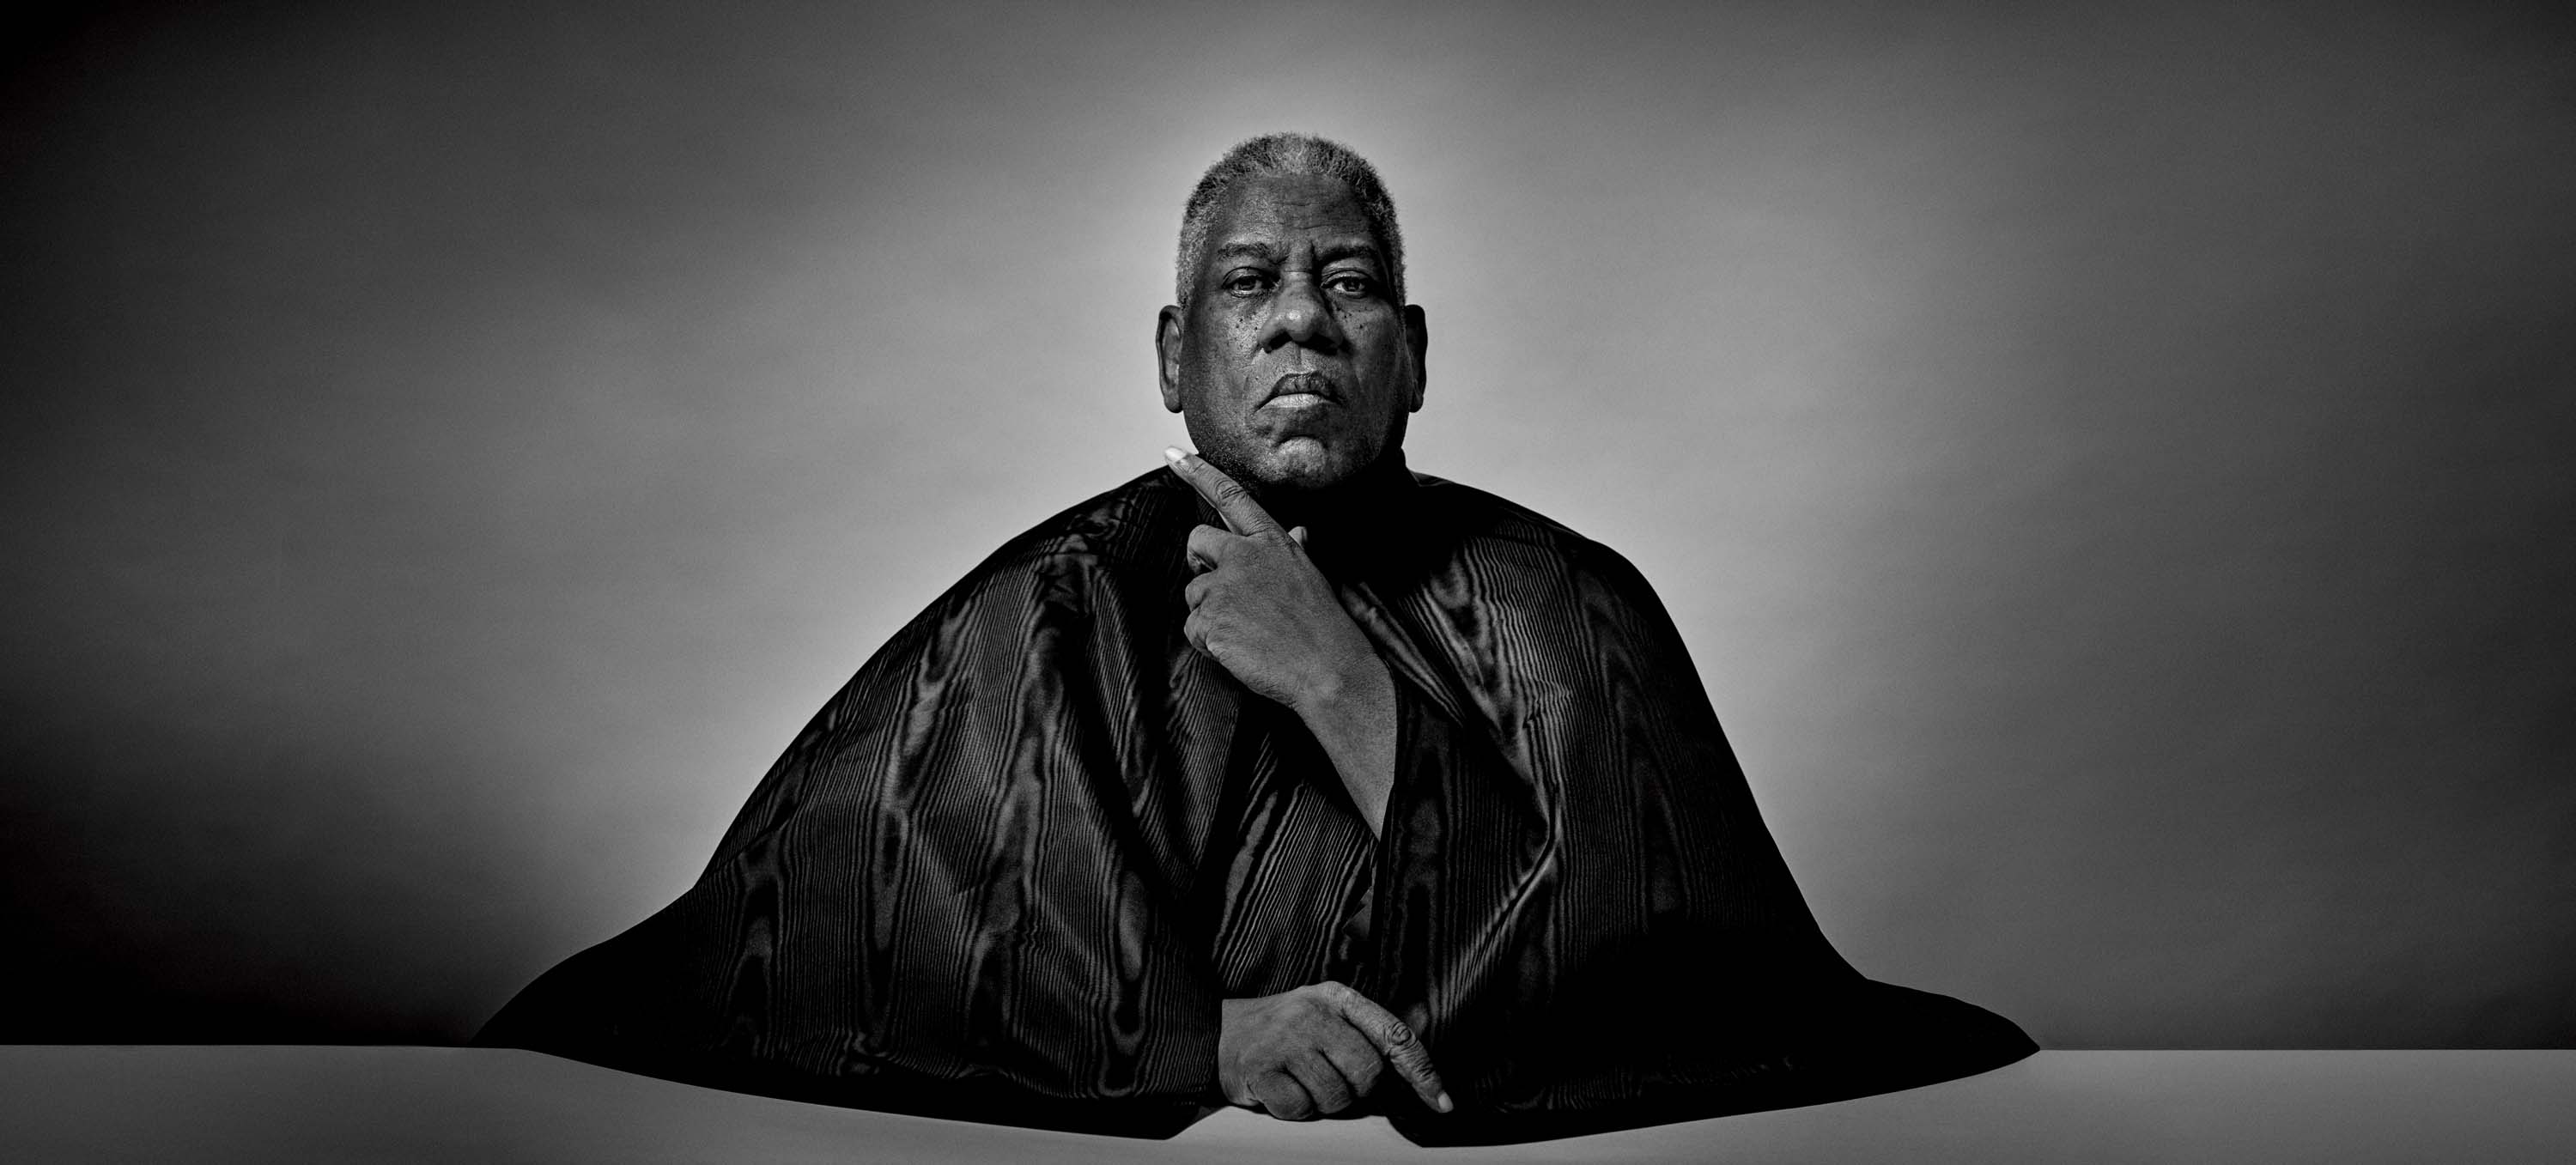 andre leon talley - photo #32